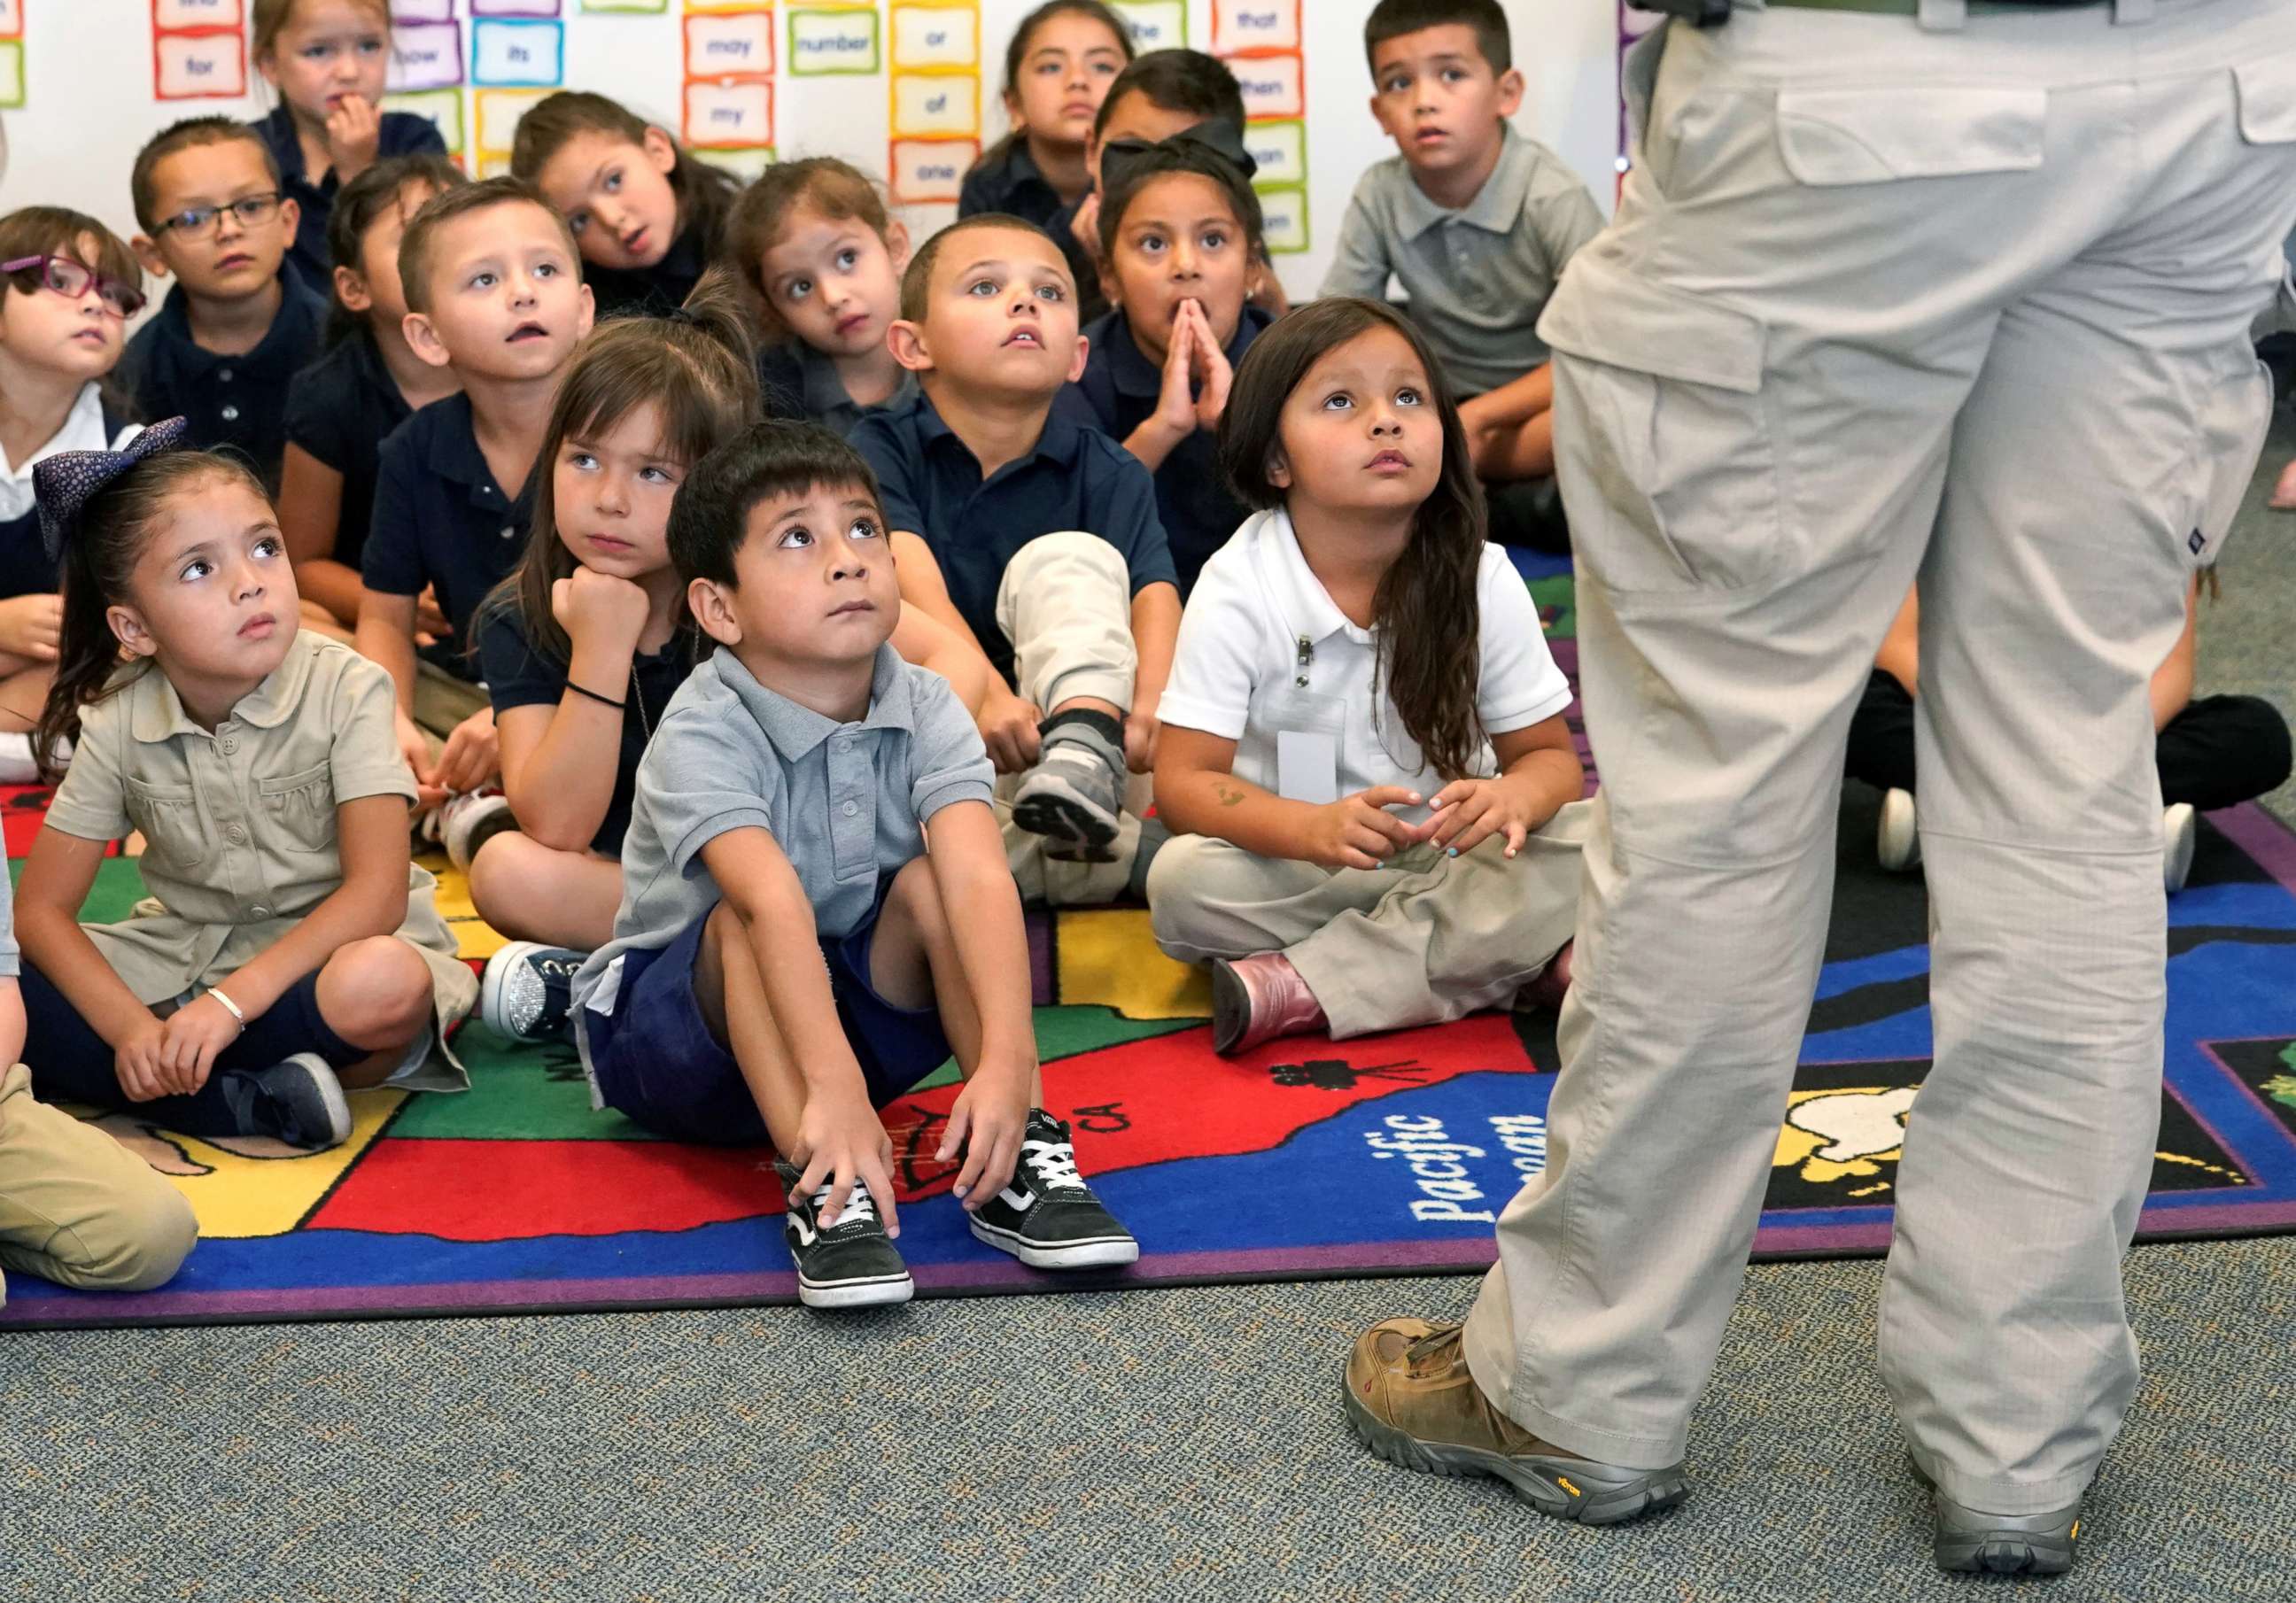 PHOTO: Joe Emery, TAC*ONE trainer and former Las Vegas police department sergeant, speaks to kindergarten students at Pinnacle Charter School during TAC*ONE training for an active shooter situation in a school in Thornton, Colorado, Aug. 29, 2019.